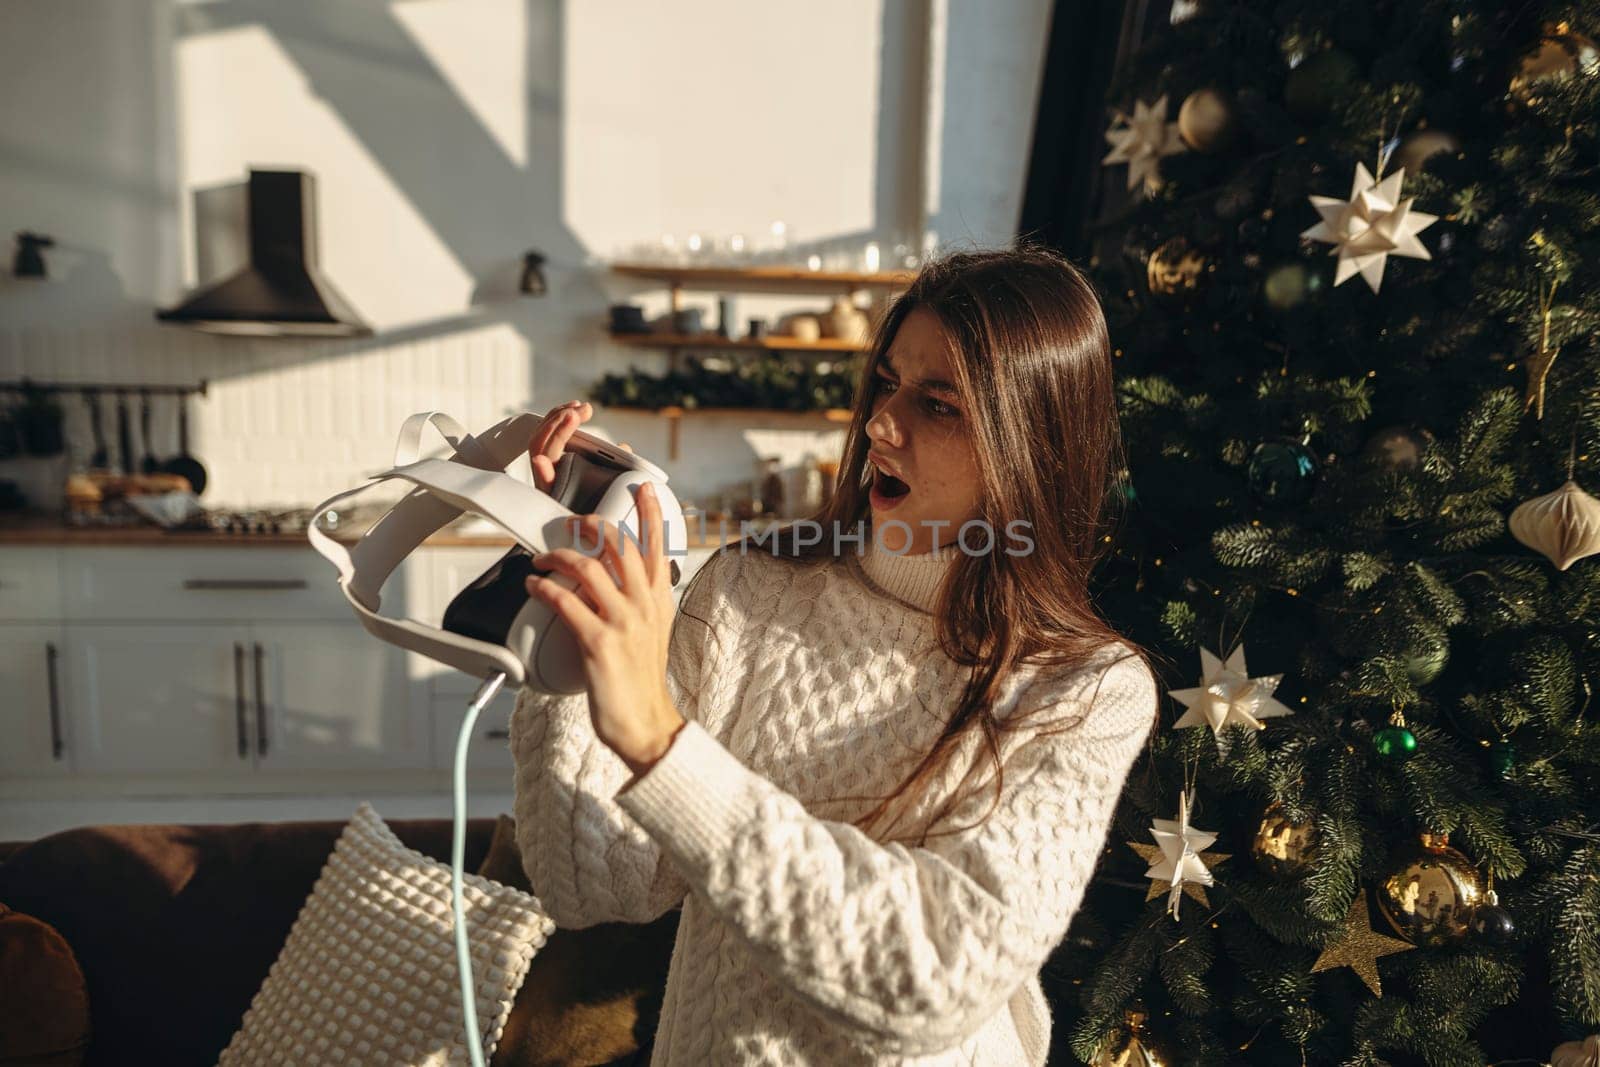 A spirited young woman unwrapped a virtual reality headset as a Christmas present. by teksomolika